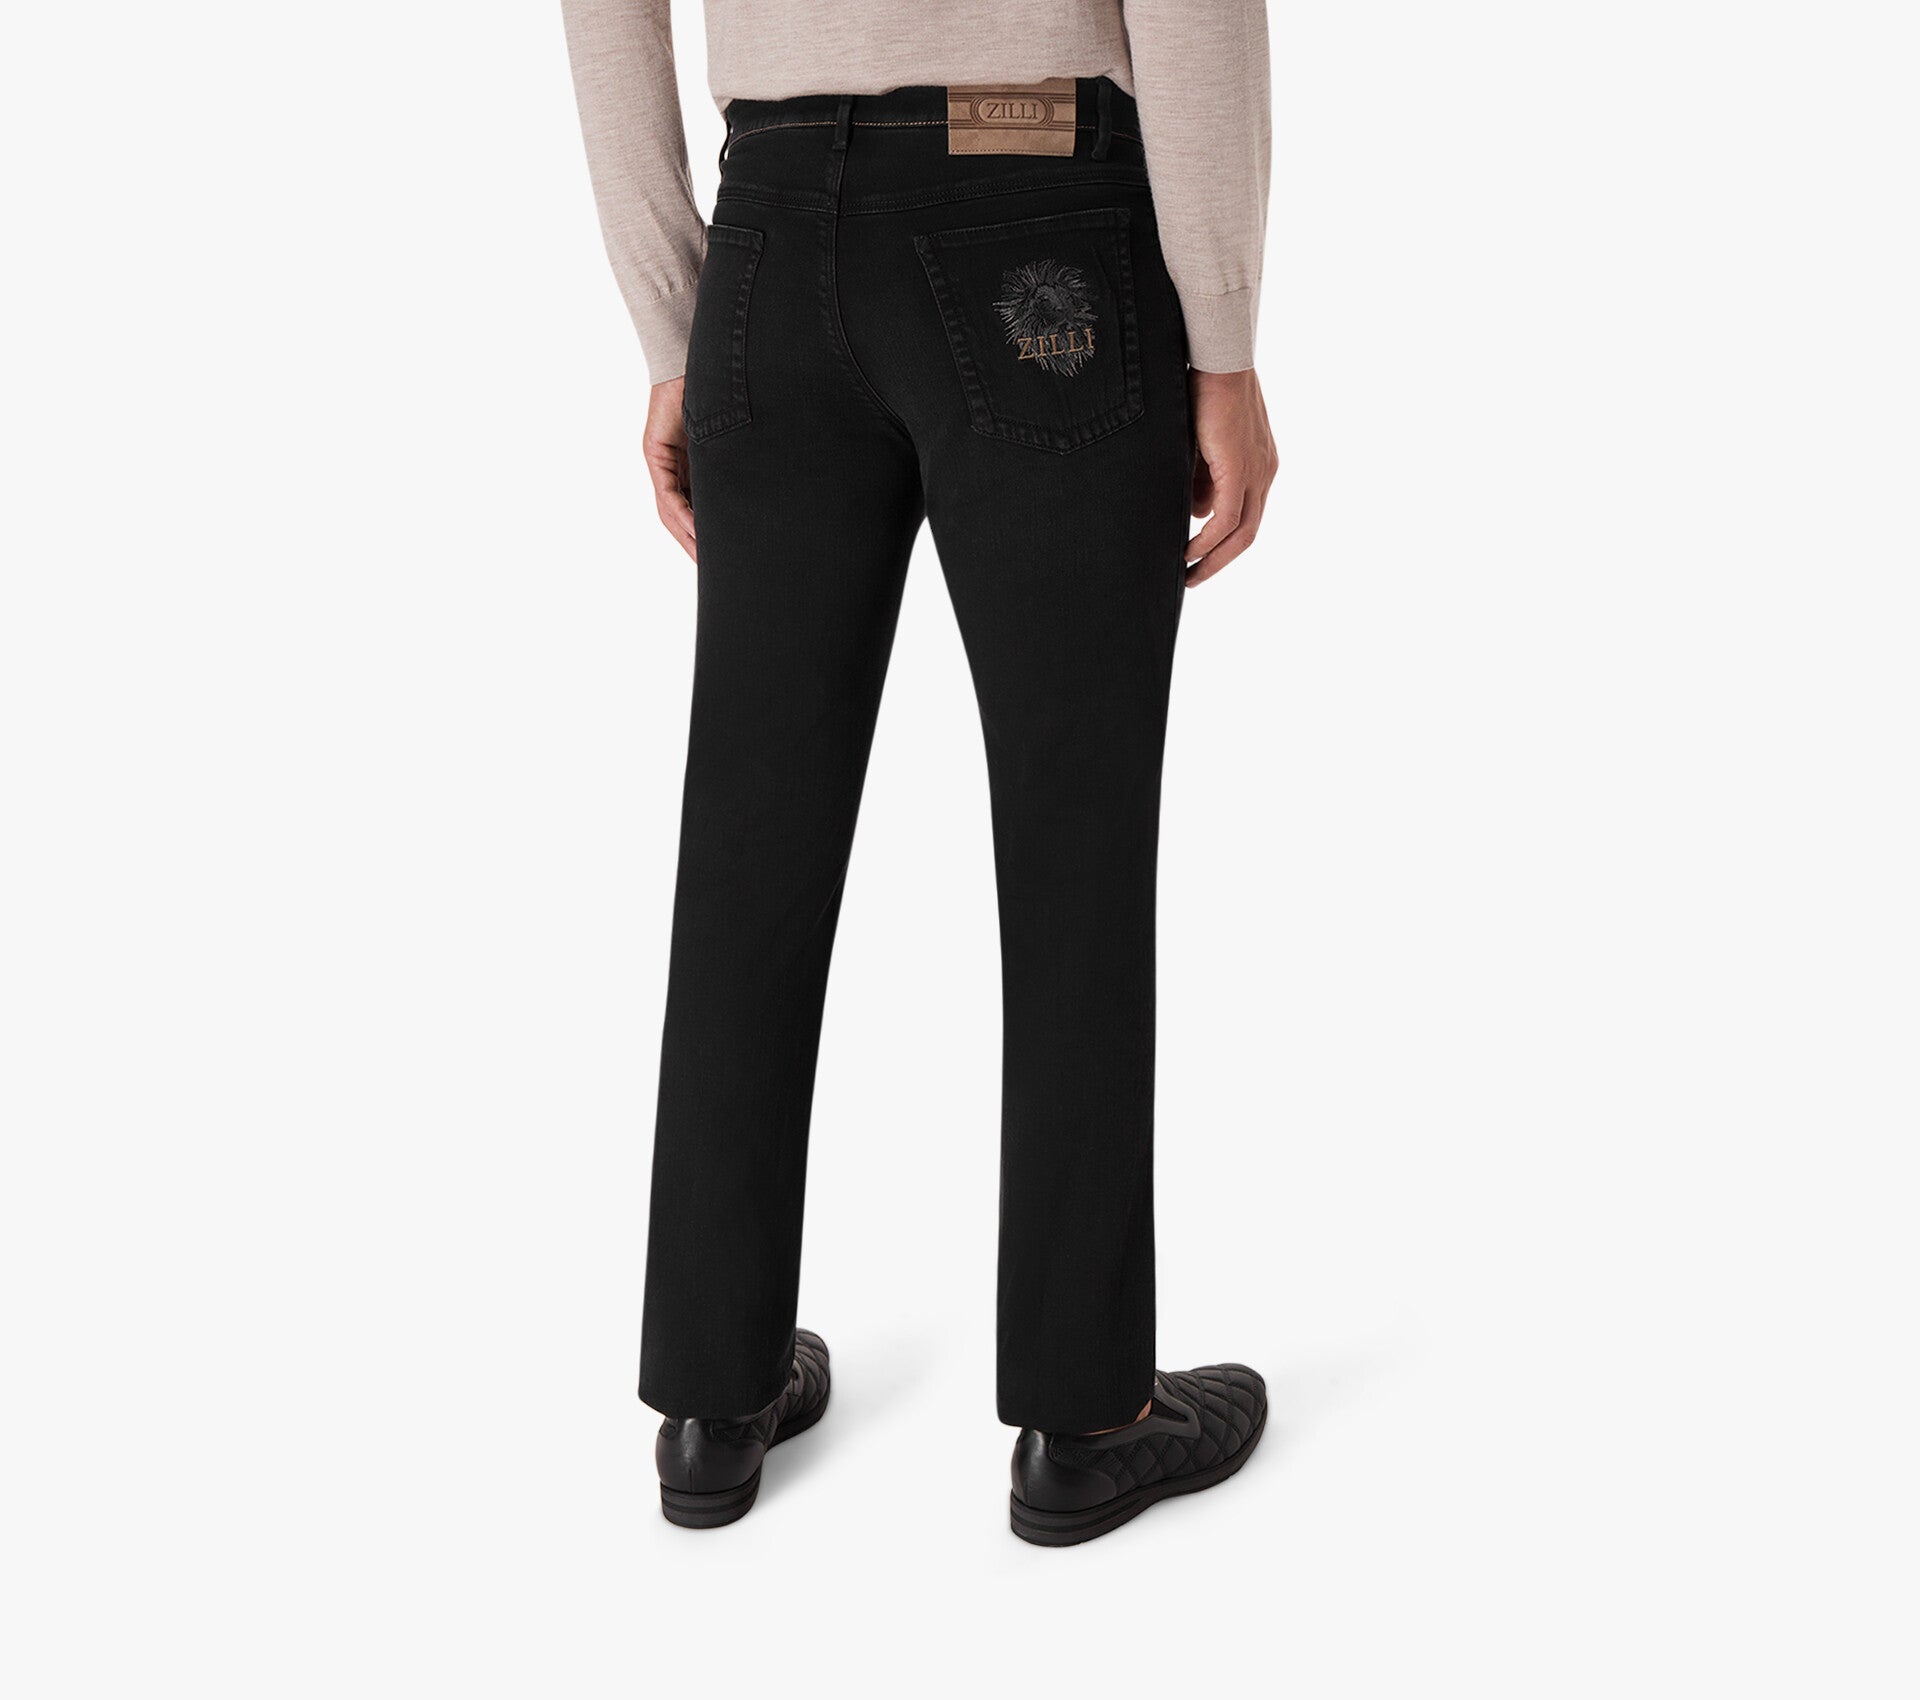 Zilli Regular Fit Jeans - Iconic Lion Embroidery